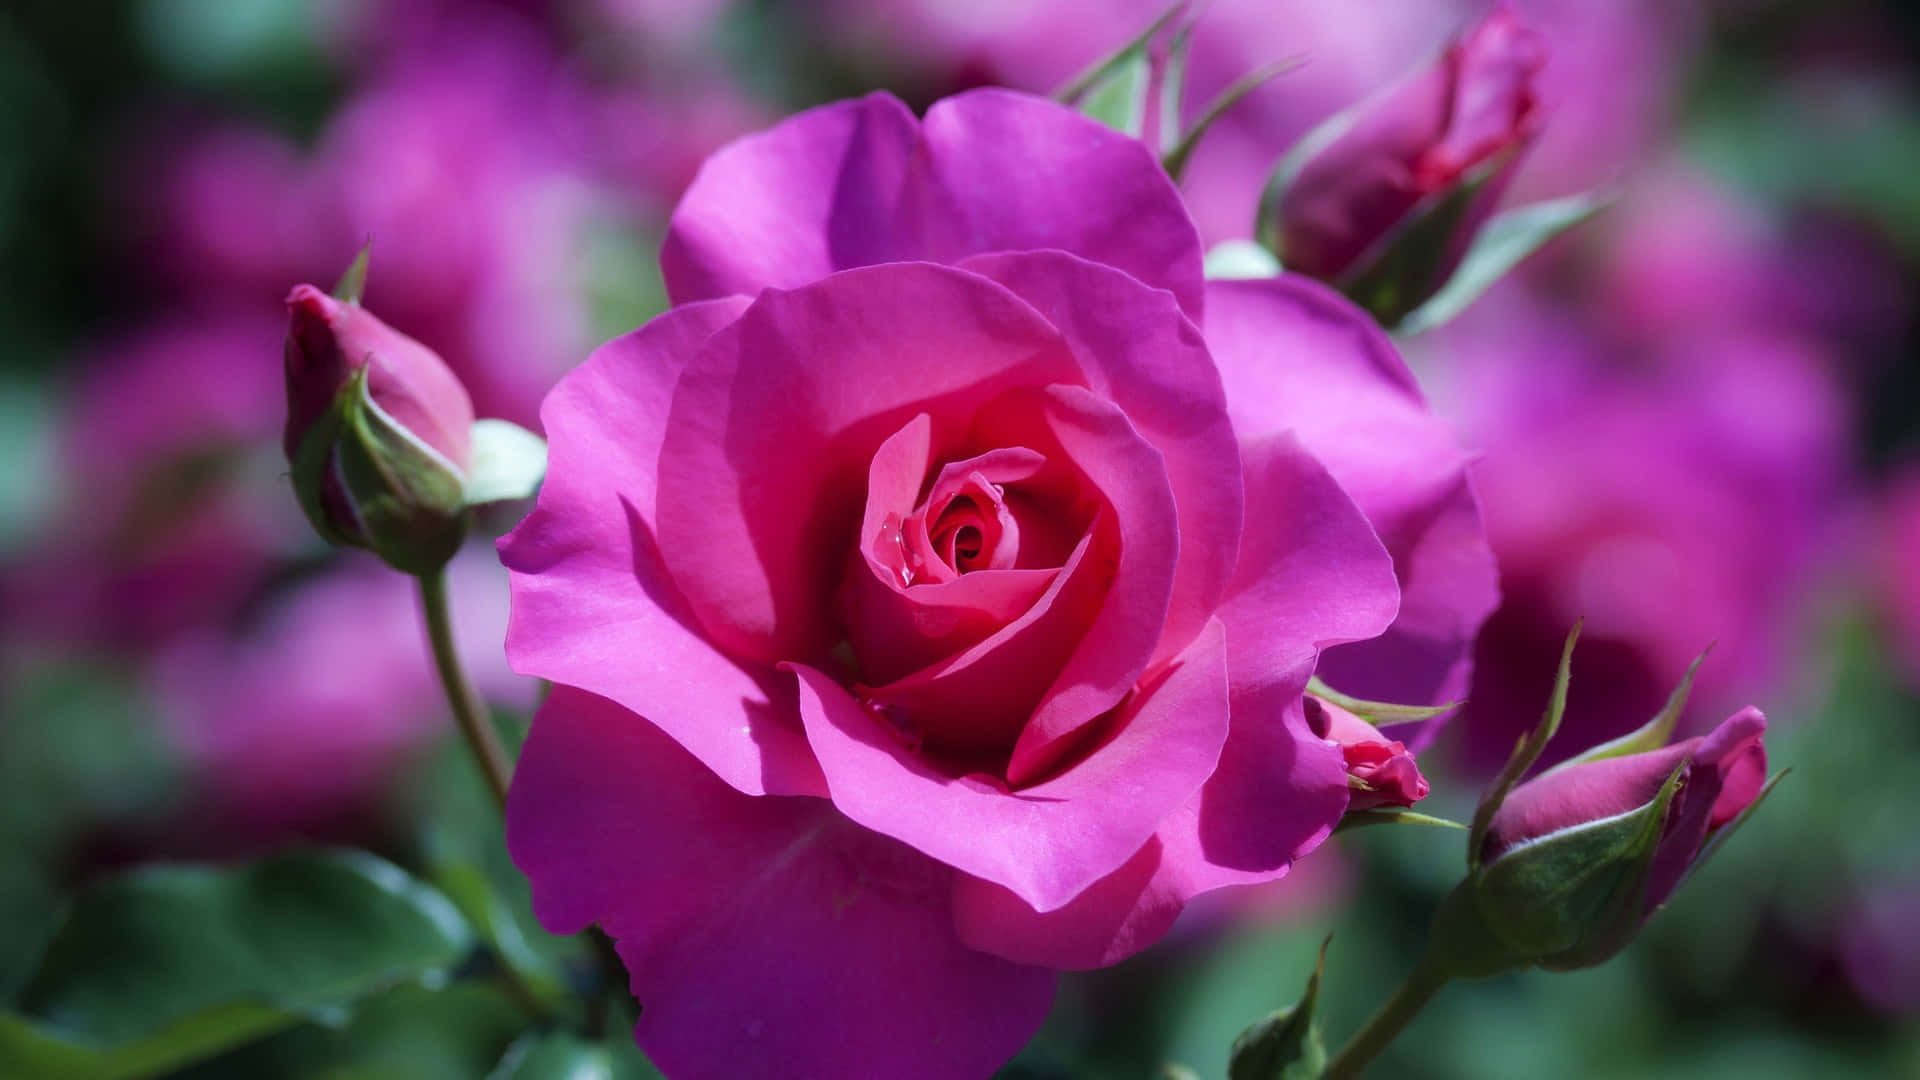 Brighten Your Day With A Beautiful HD Rose Wallpaper